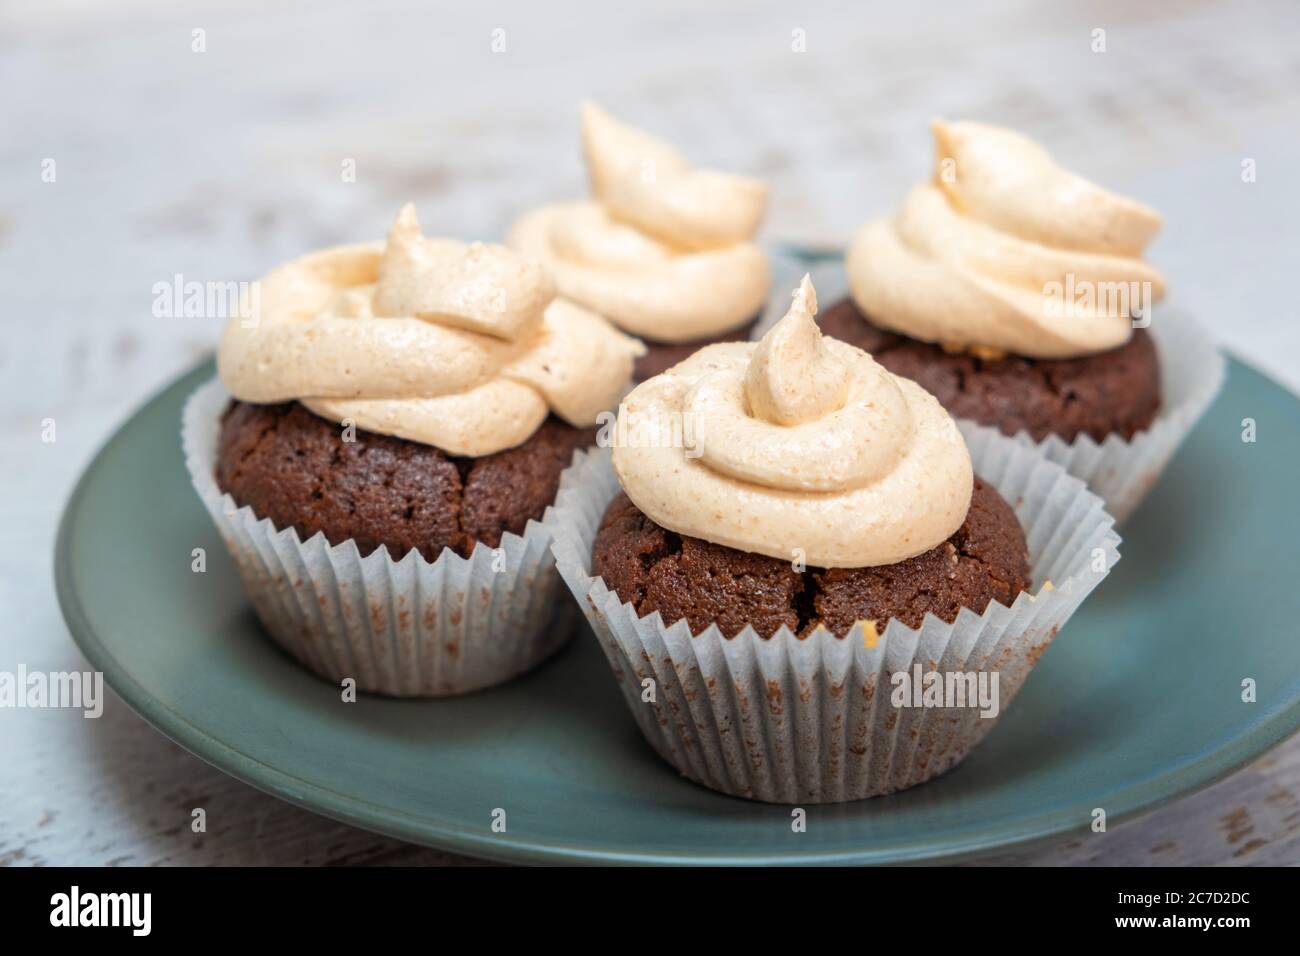 Cupcakes with peanut butter toppings Stock Photo